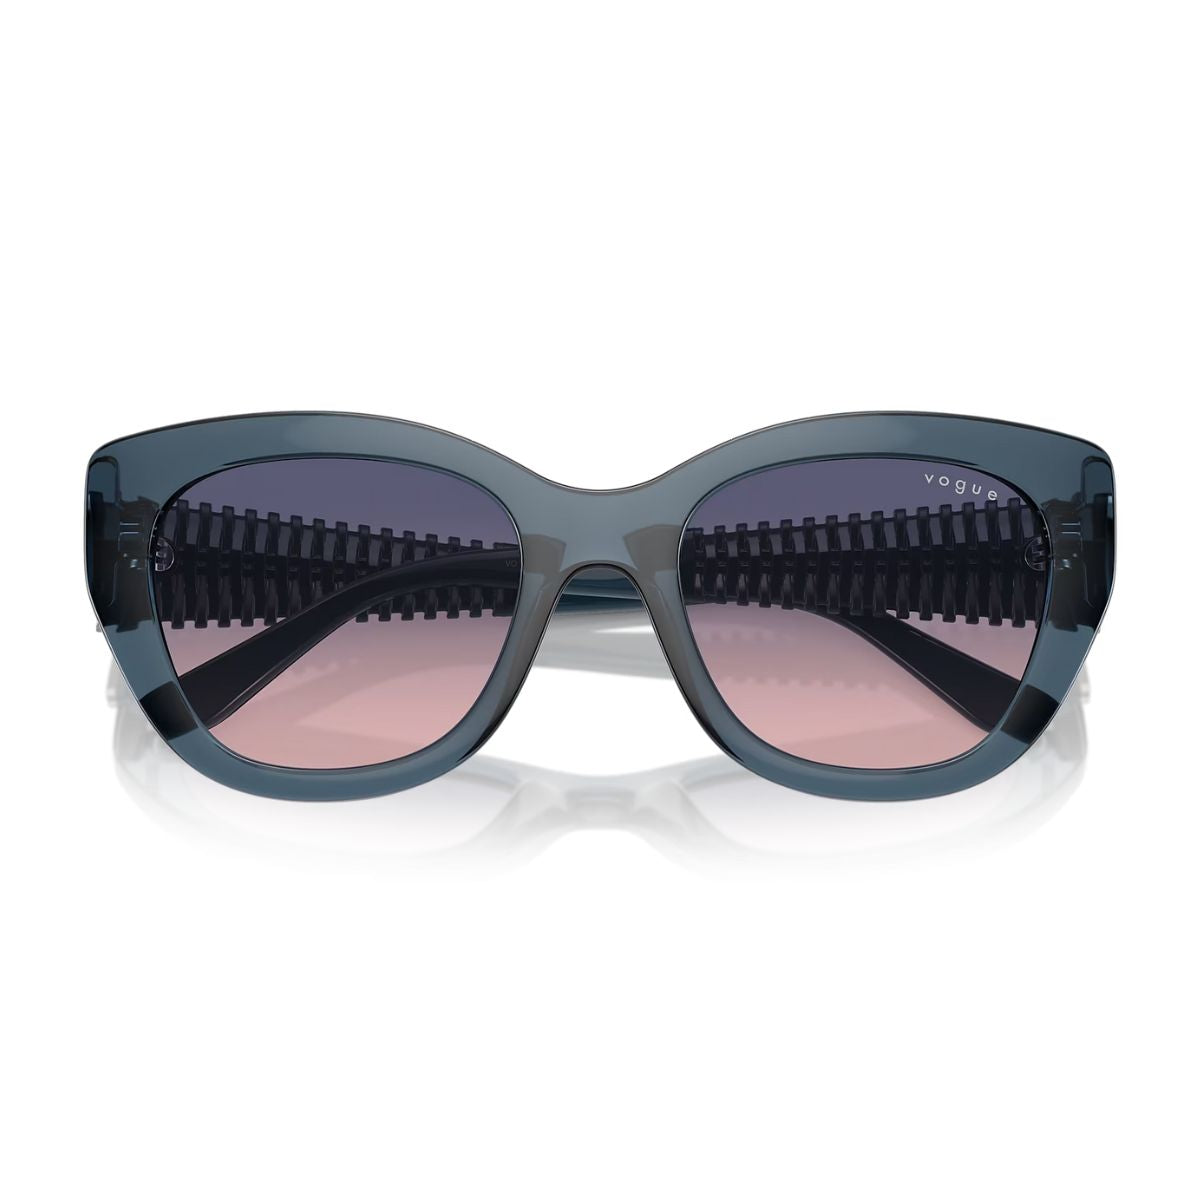 "Shop Latest Vogue UV Protection Cat Eye Sunglasses For Women's At Optorium"